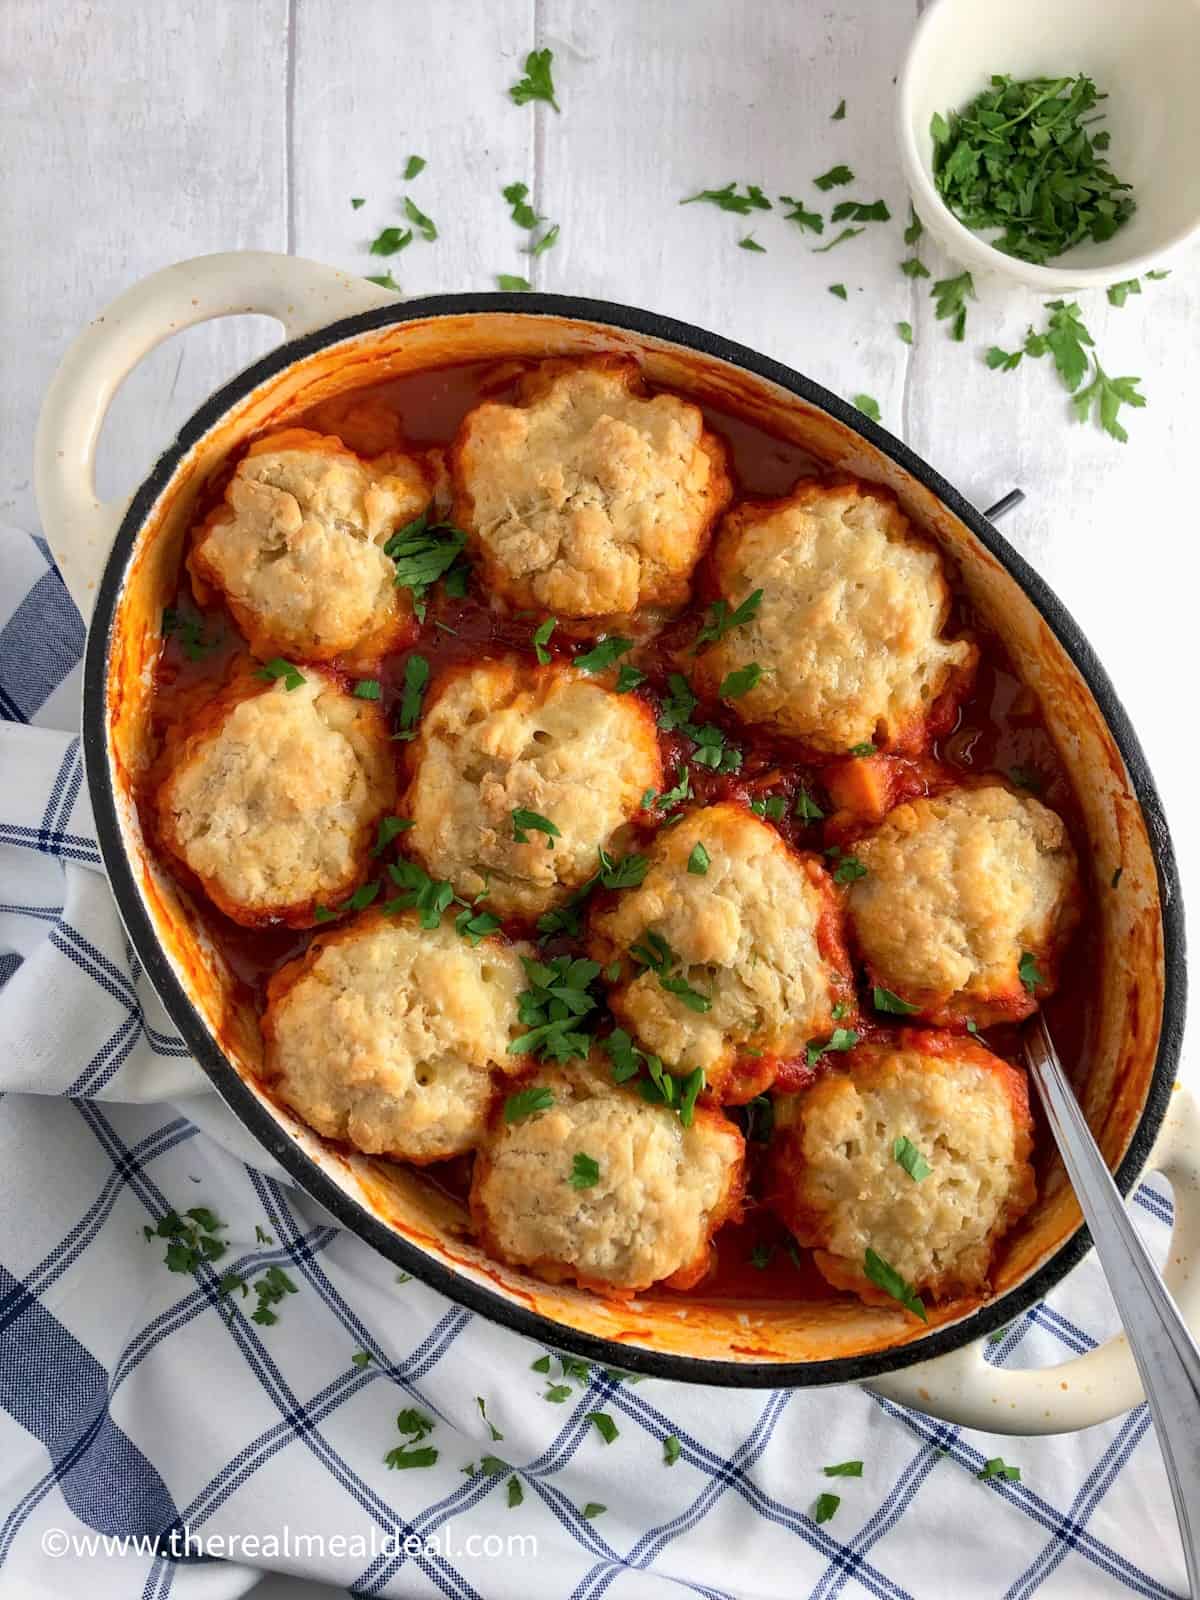 winter vegetable casserole with vegan dumplings topped with fresh parsley.